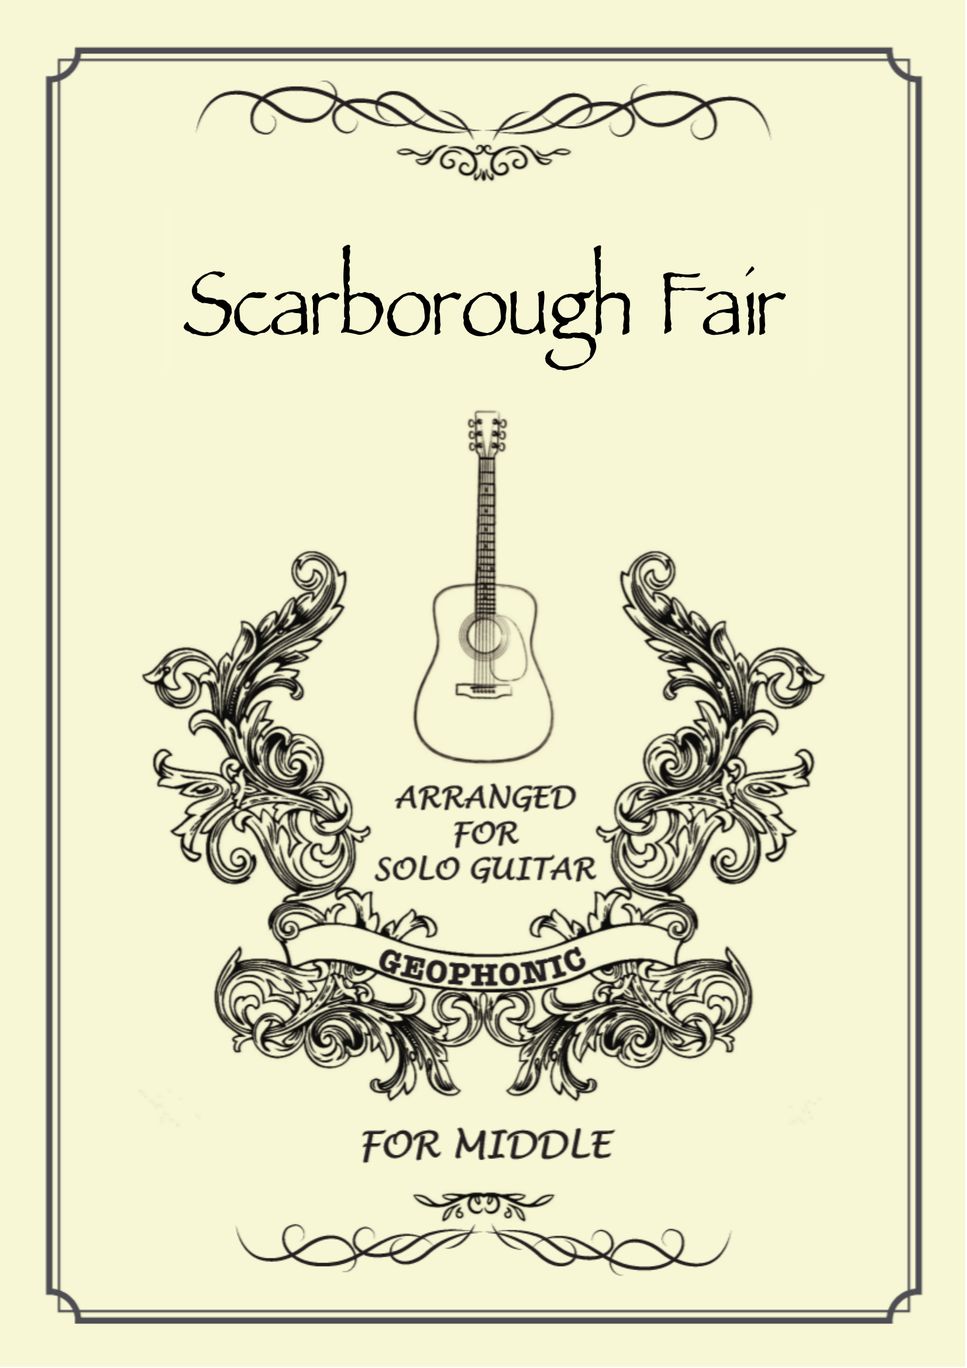 England folk song - Scarborough Fair by GEOPHONIC